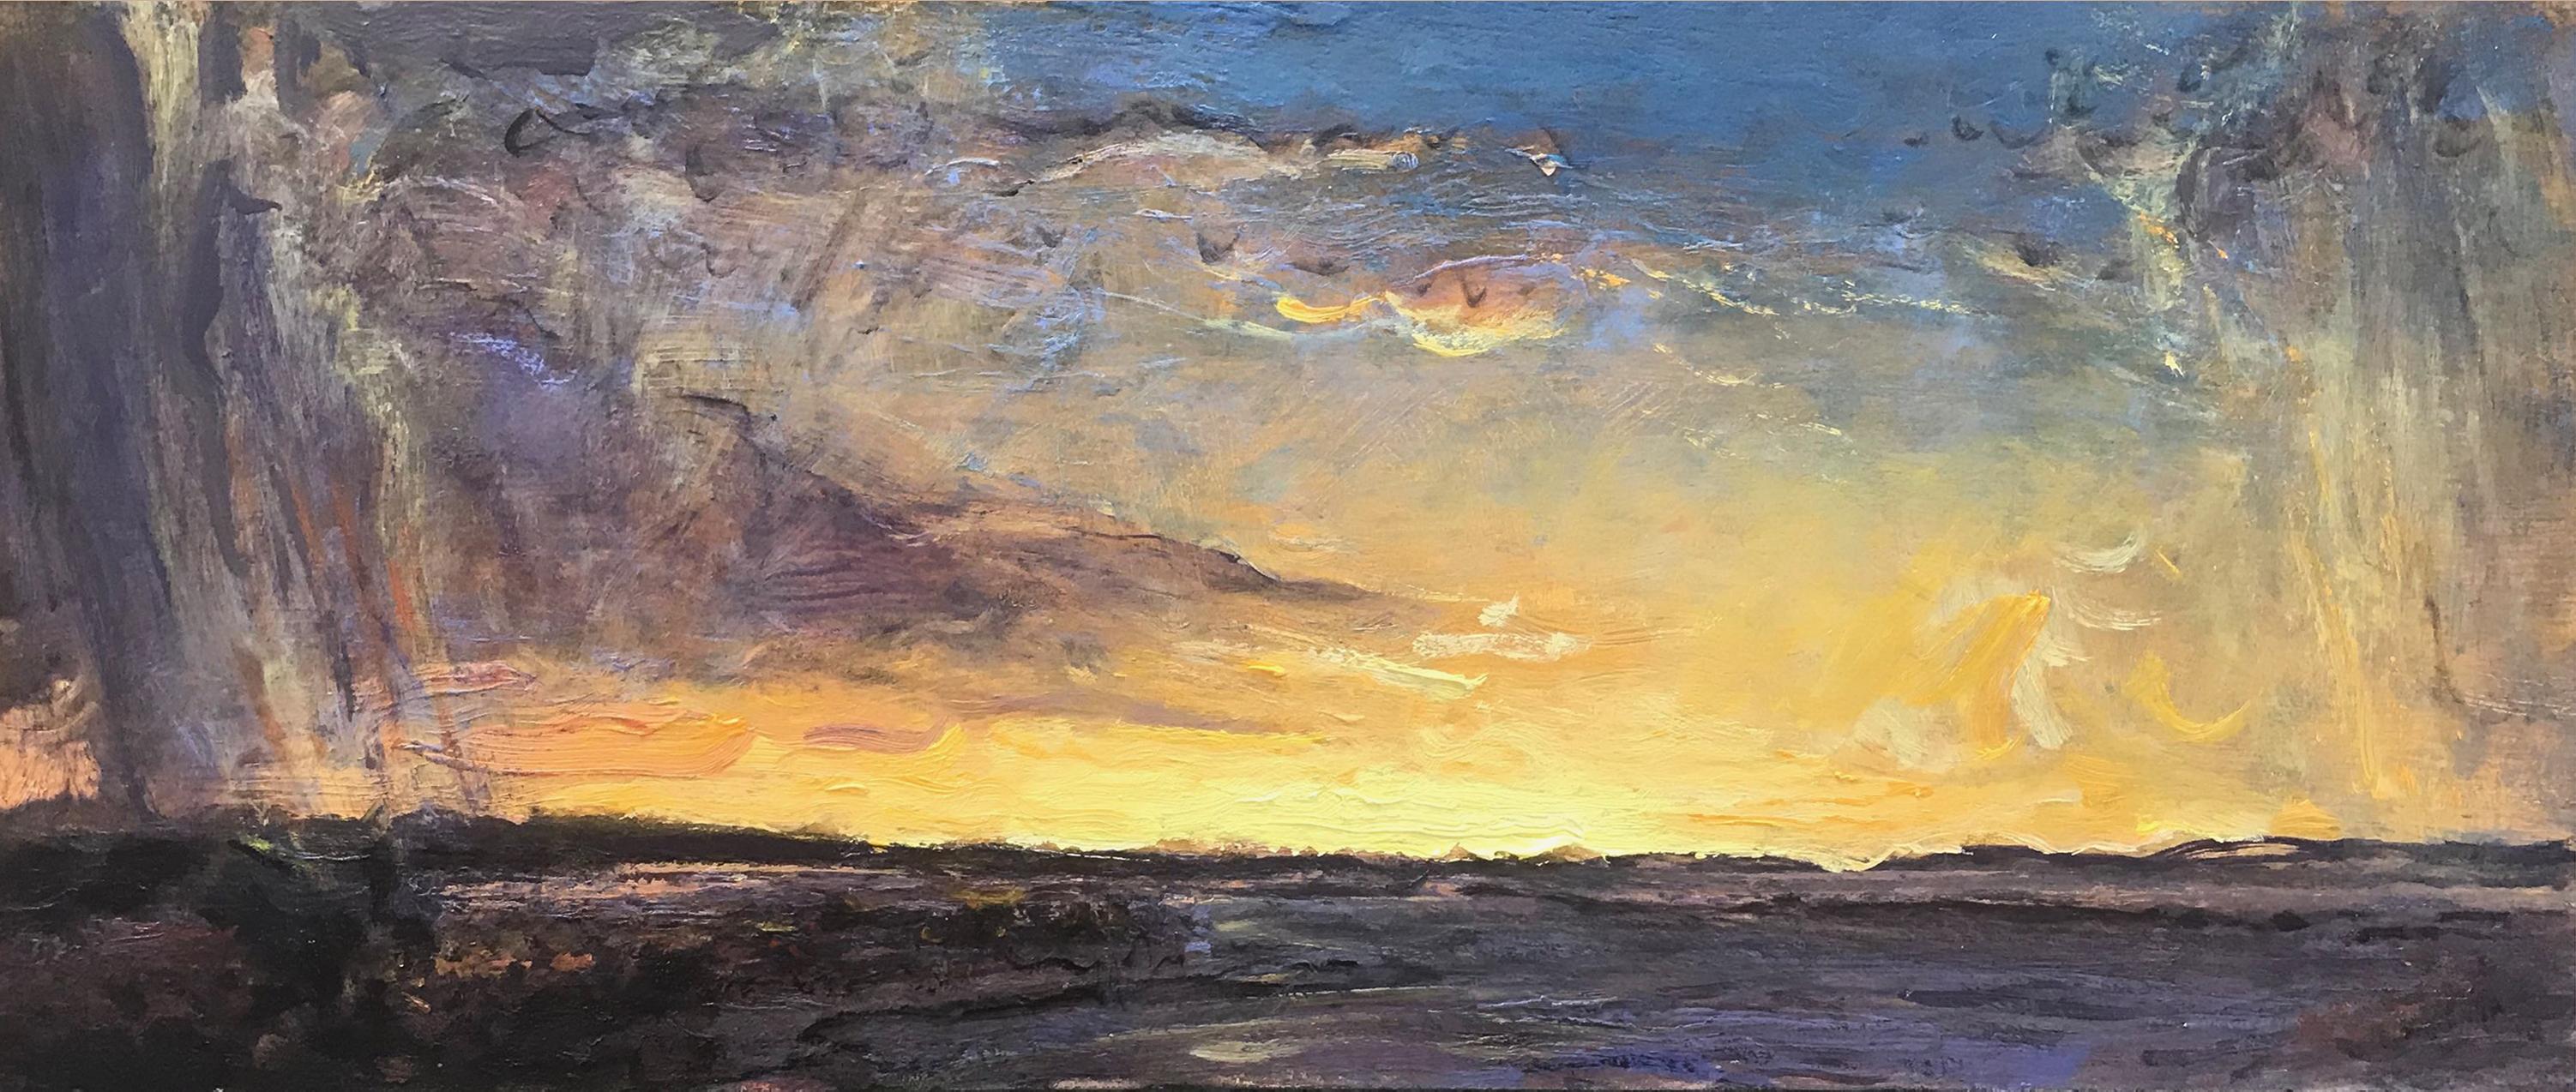 "Sunset Storm", Oil Painting